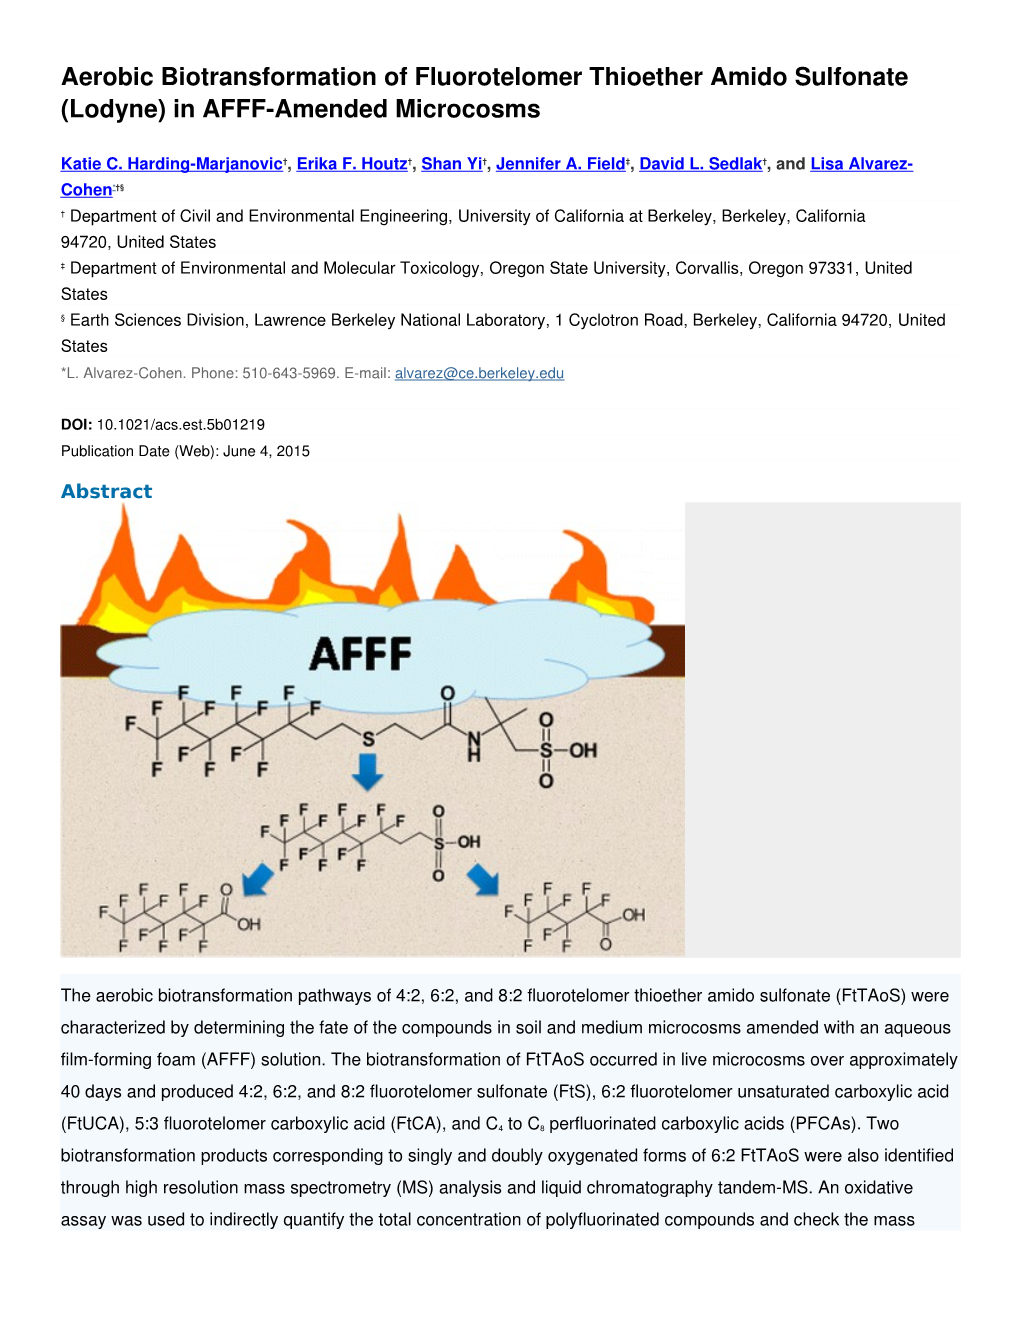 Aerobic Biotransformation of Fluorotelomer Thioether Amido Sulfonate (Lodyne) in AFFF­Amended Microcosms